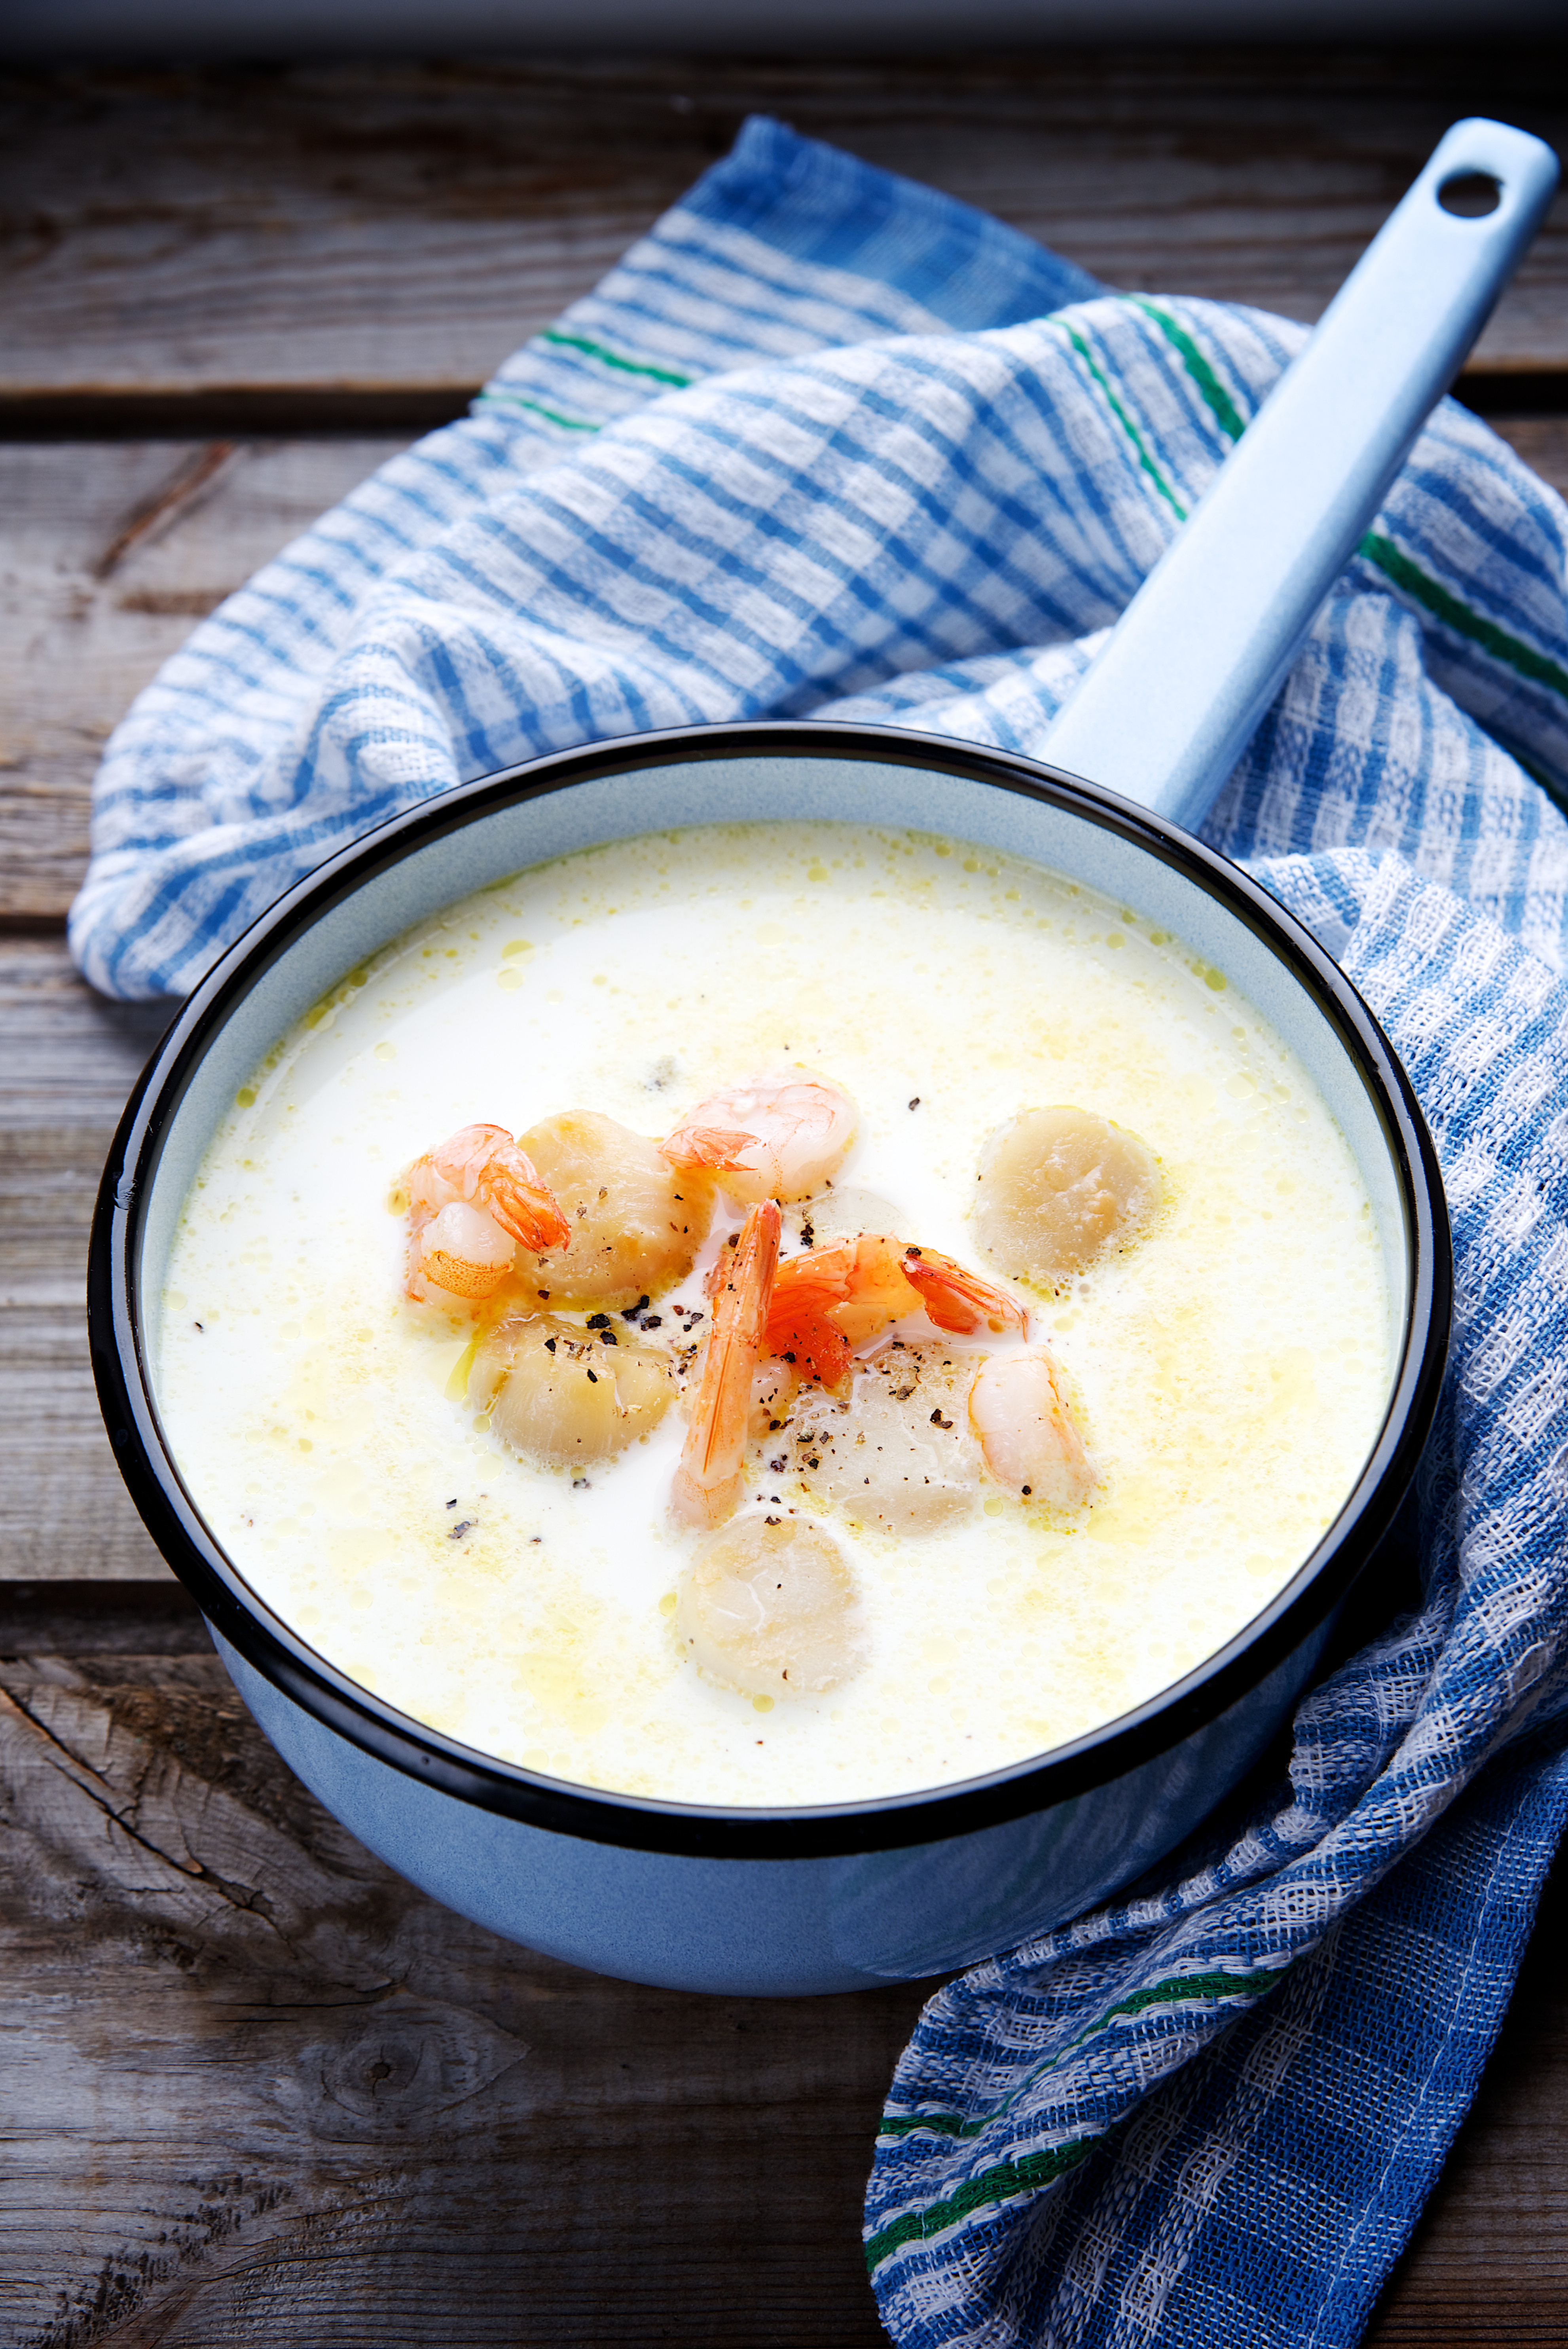 Seafood Chowder - By Renette